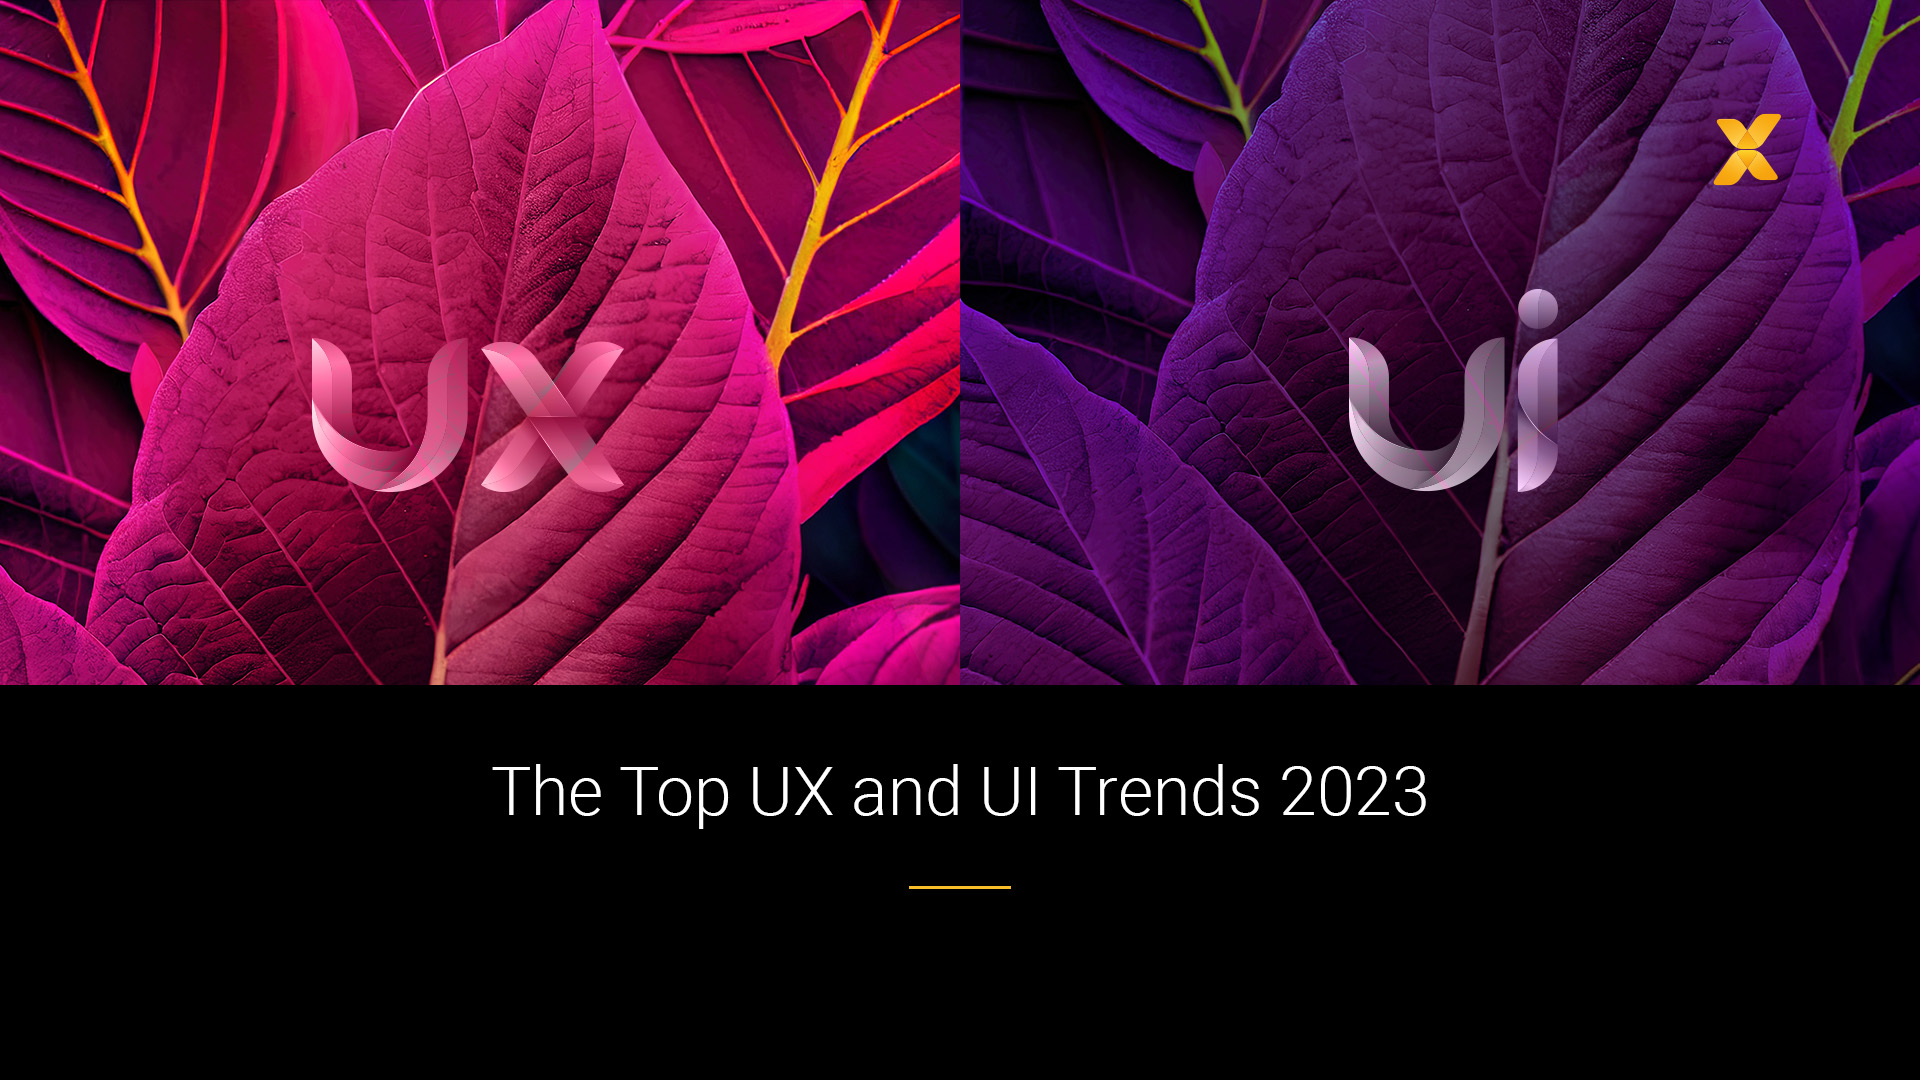 The UX and UI Trends in 2023